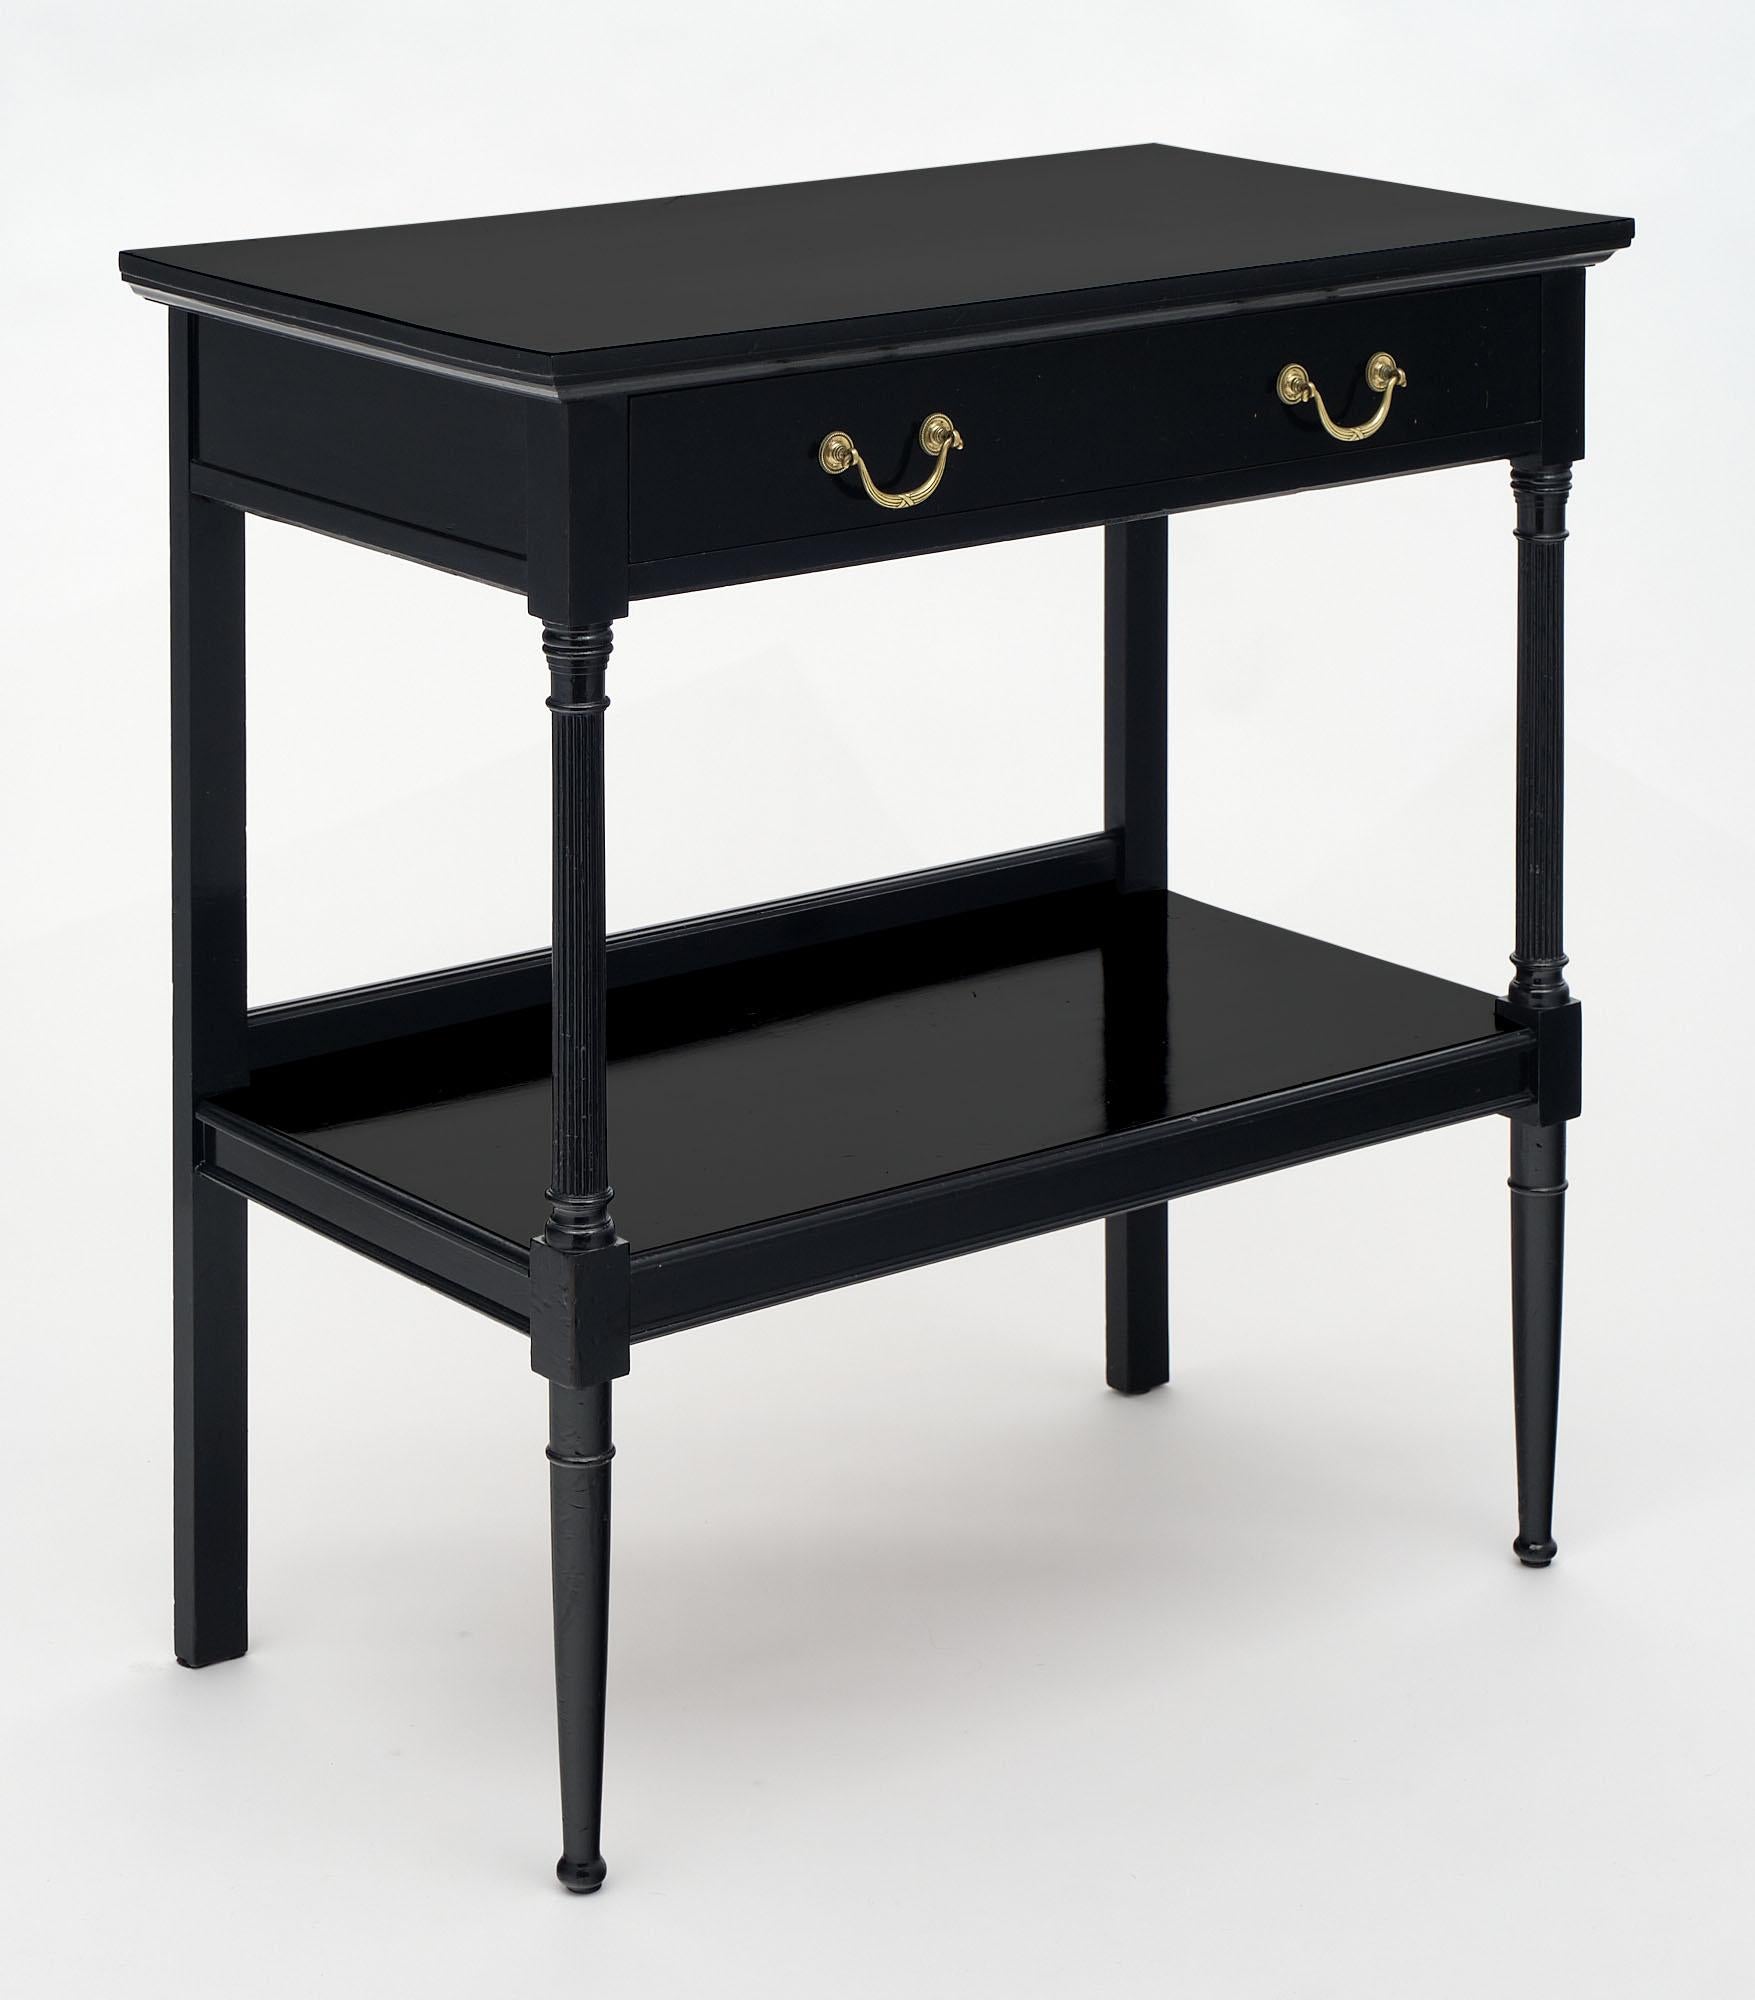 Console from France in the Louis XVI style made of mahogany with oak as a secondary wood. This piece is ebonized with a French polish finish. One functional dovetailed drawer features finely cast bronze hardware.